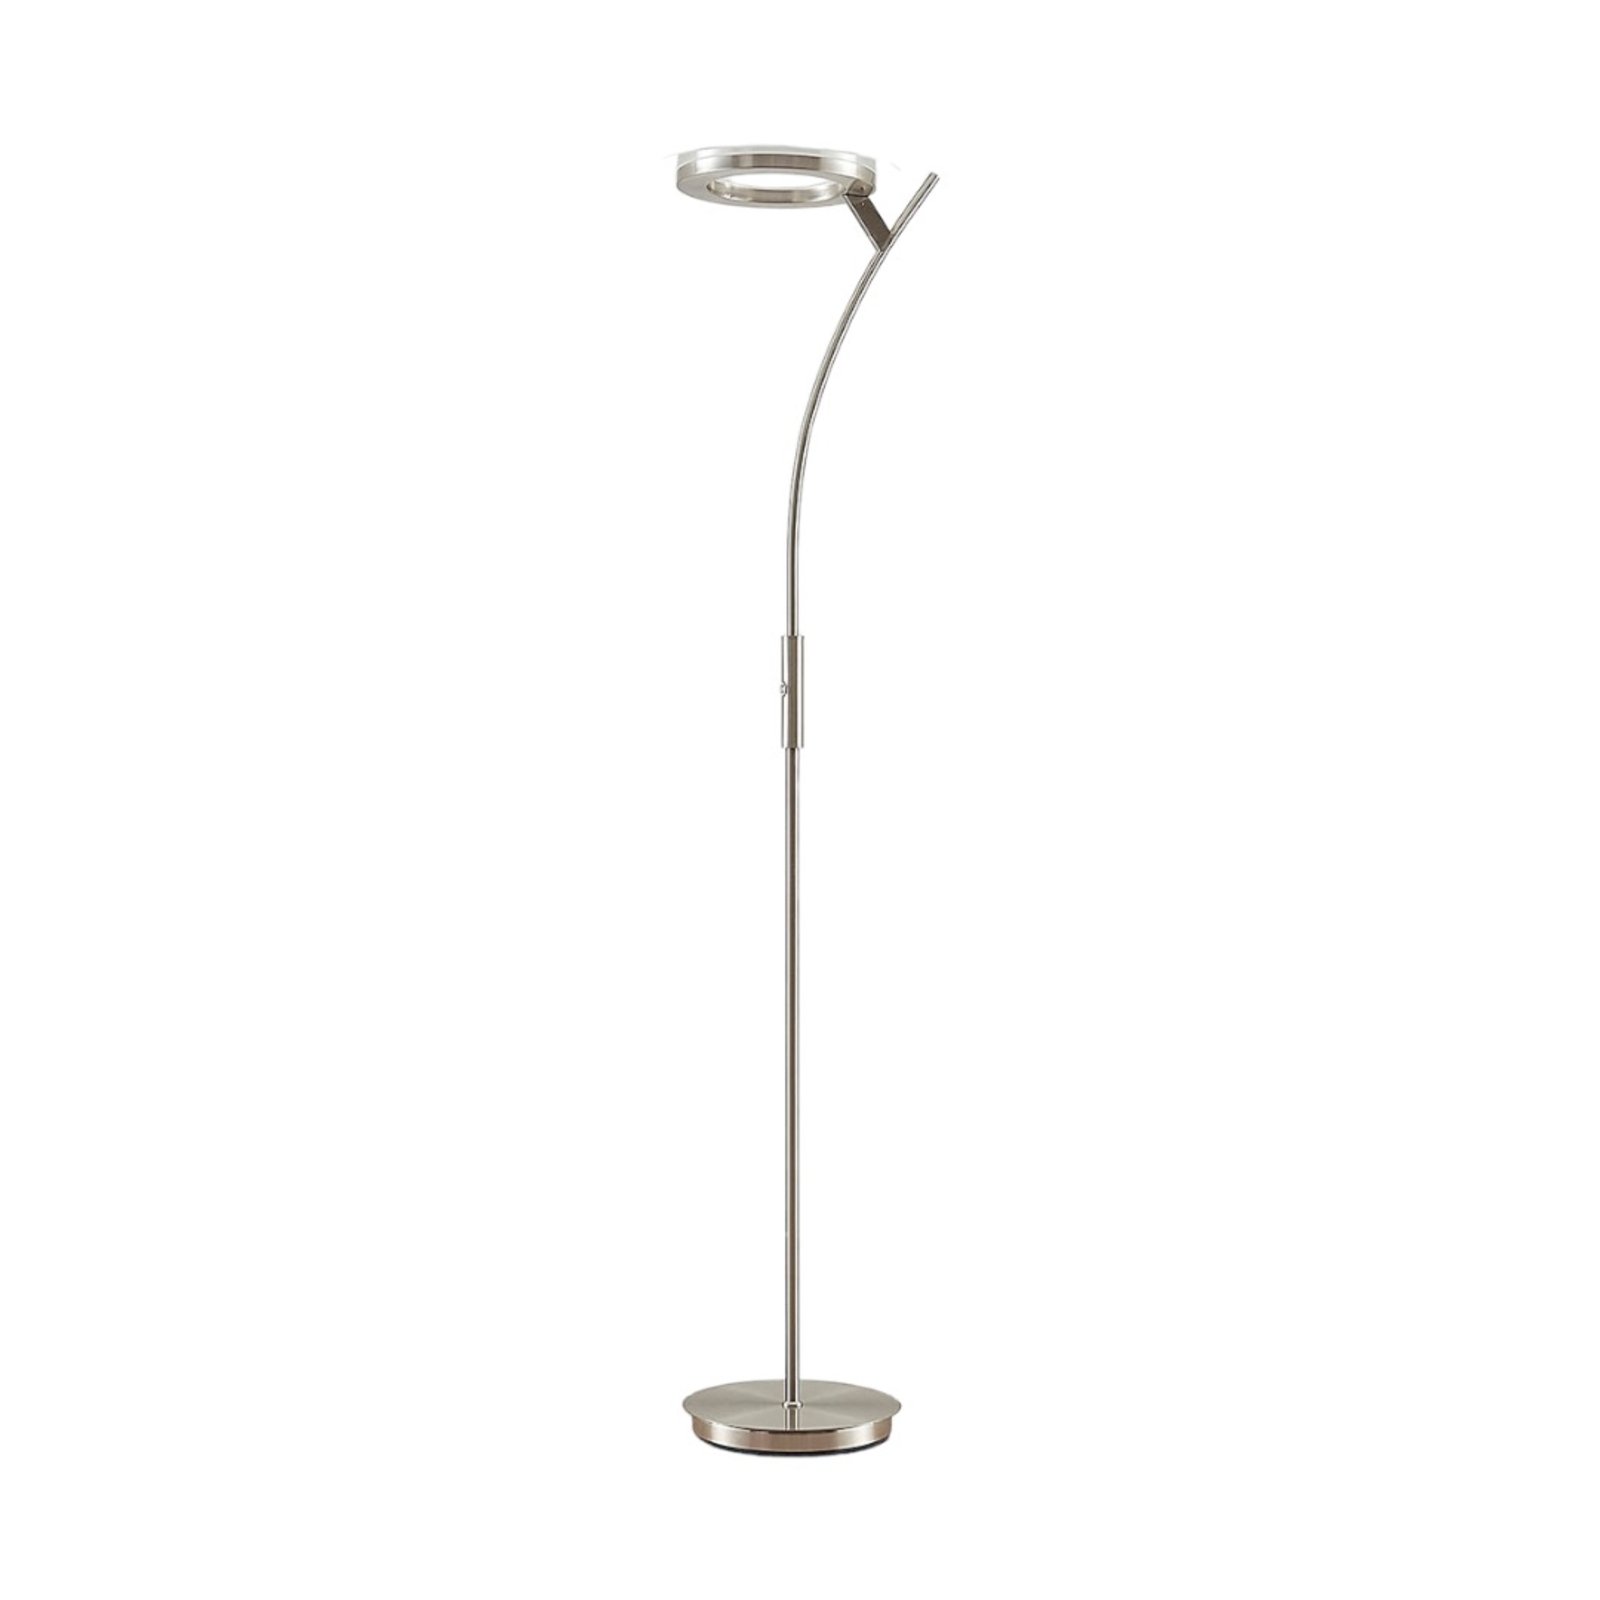 LED uplighter floor lamp Darion with a dimmer